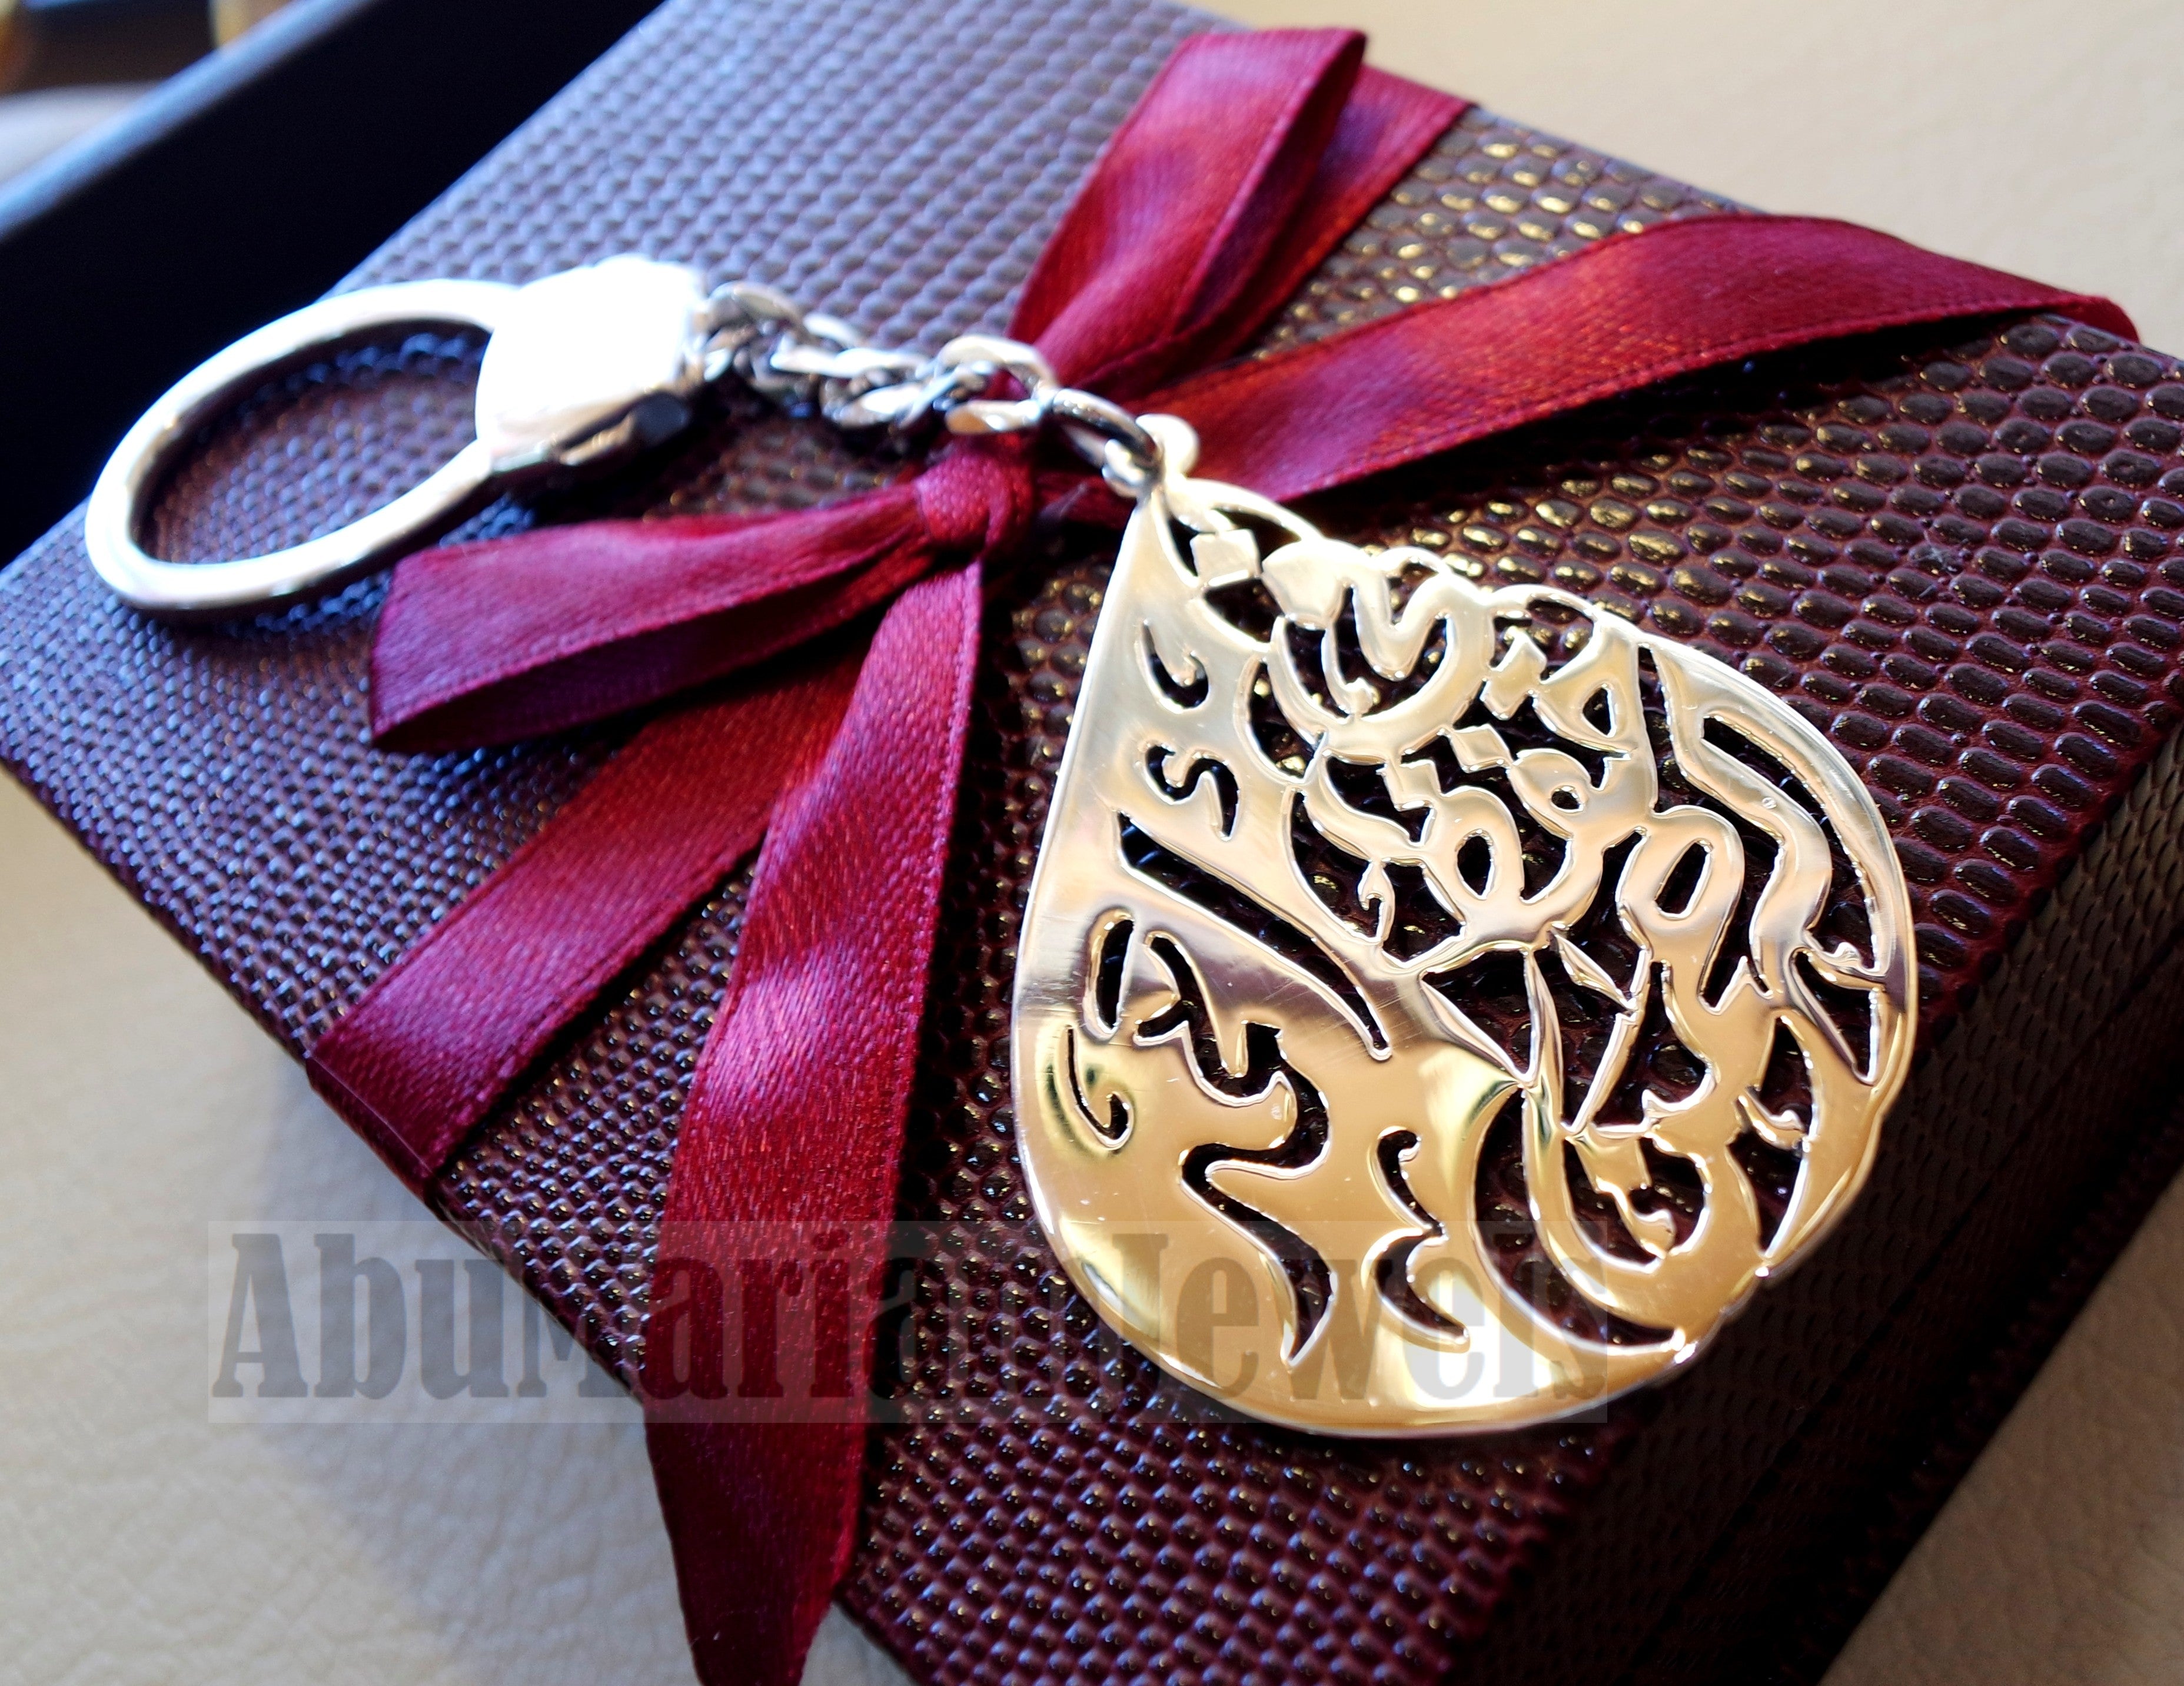 Key chain name arabic and phrase made to order customized sterling silver 925 big size في حفظ الرحمن - 2 اسماء عربي